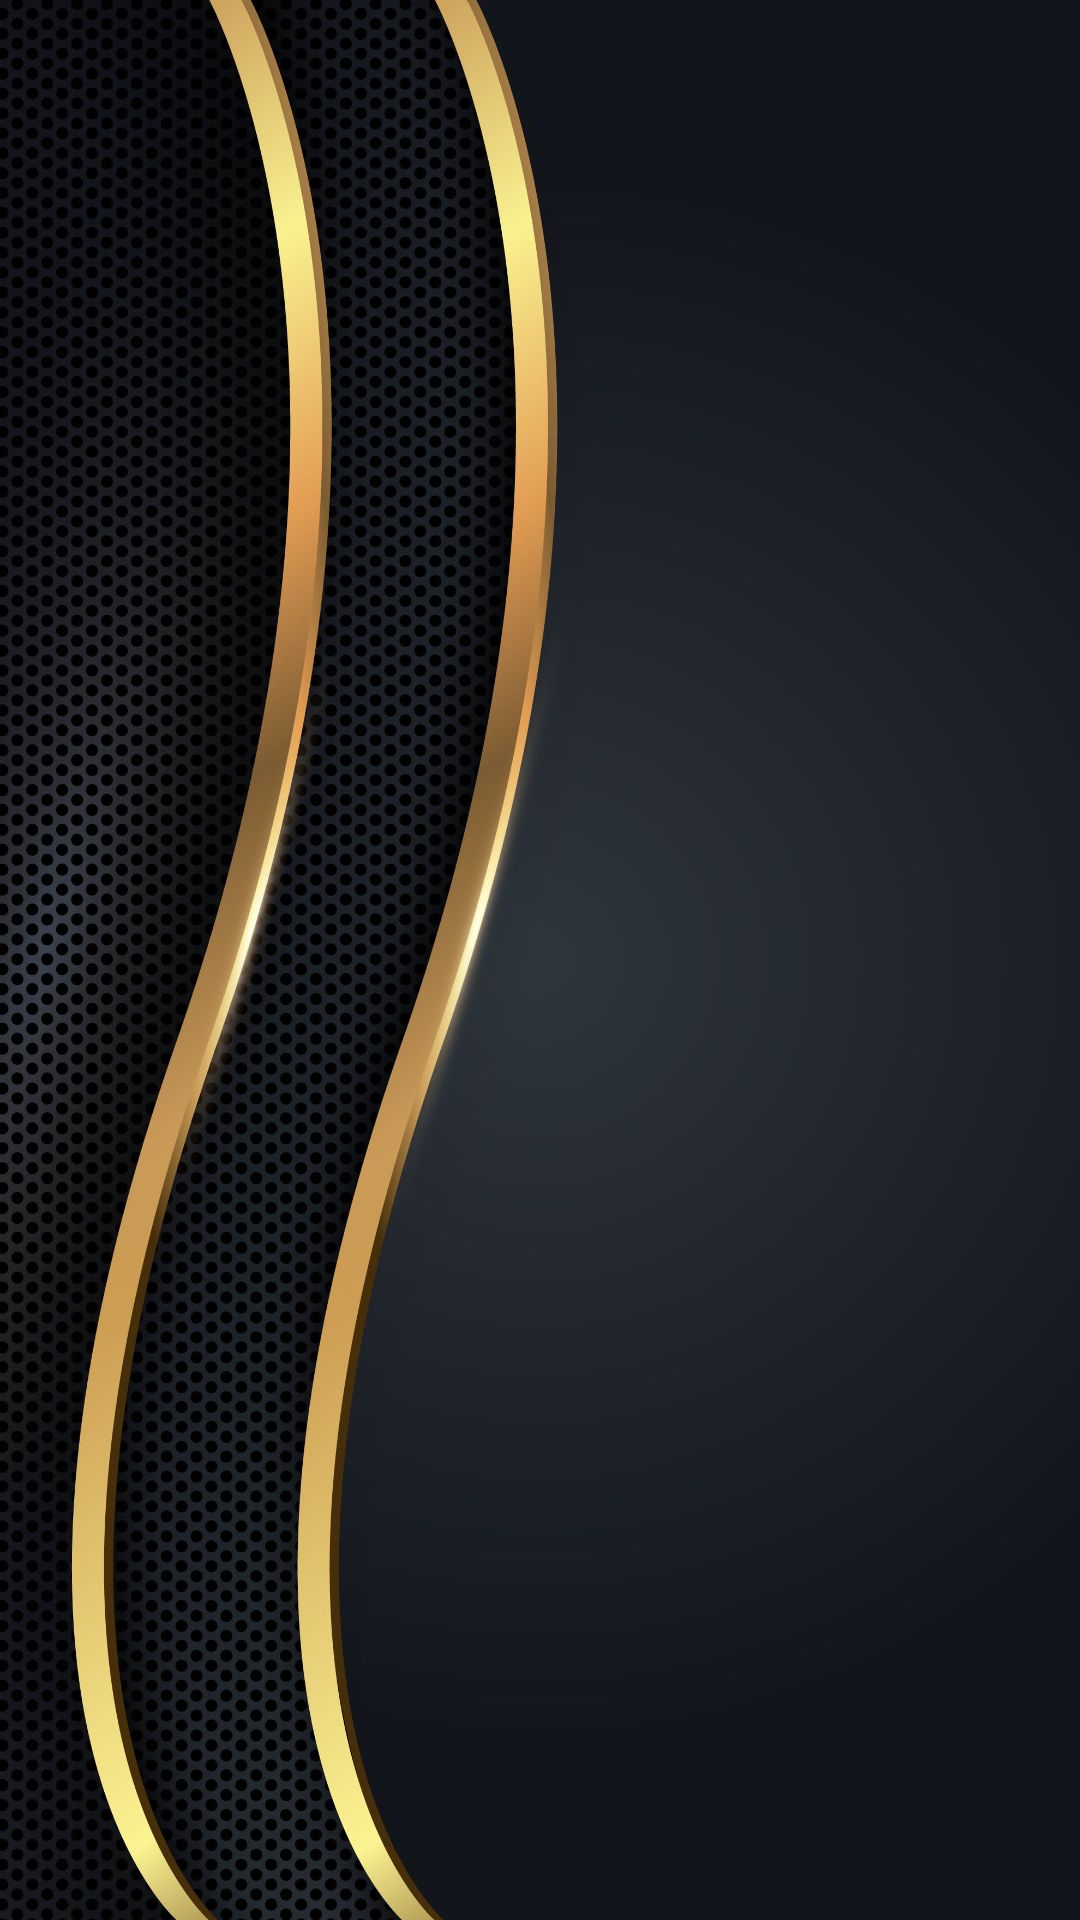 Black and gold wallpapers